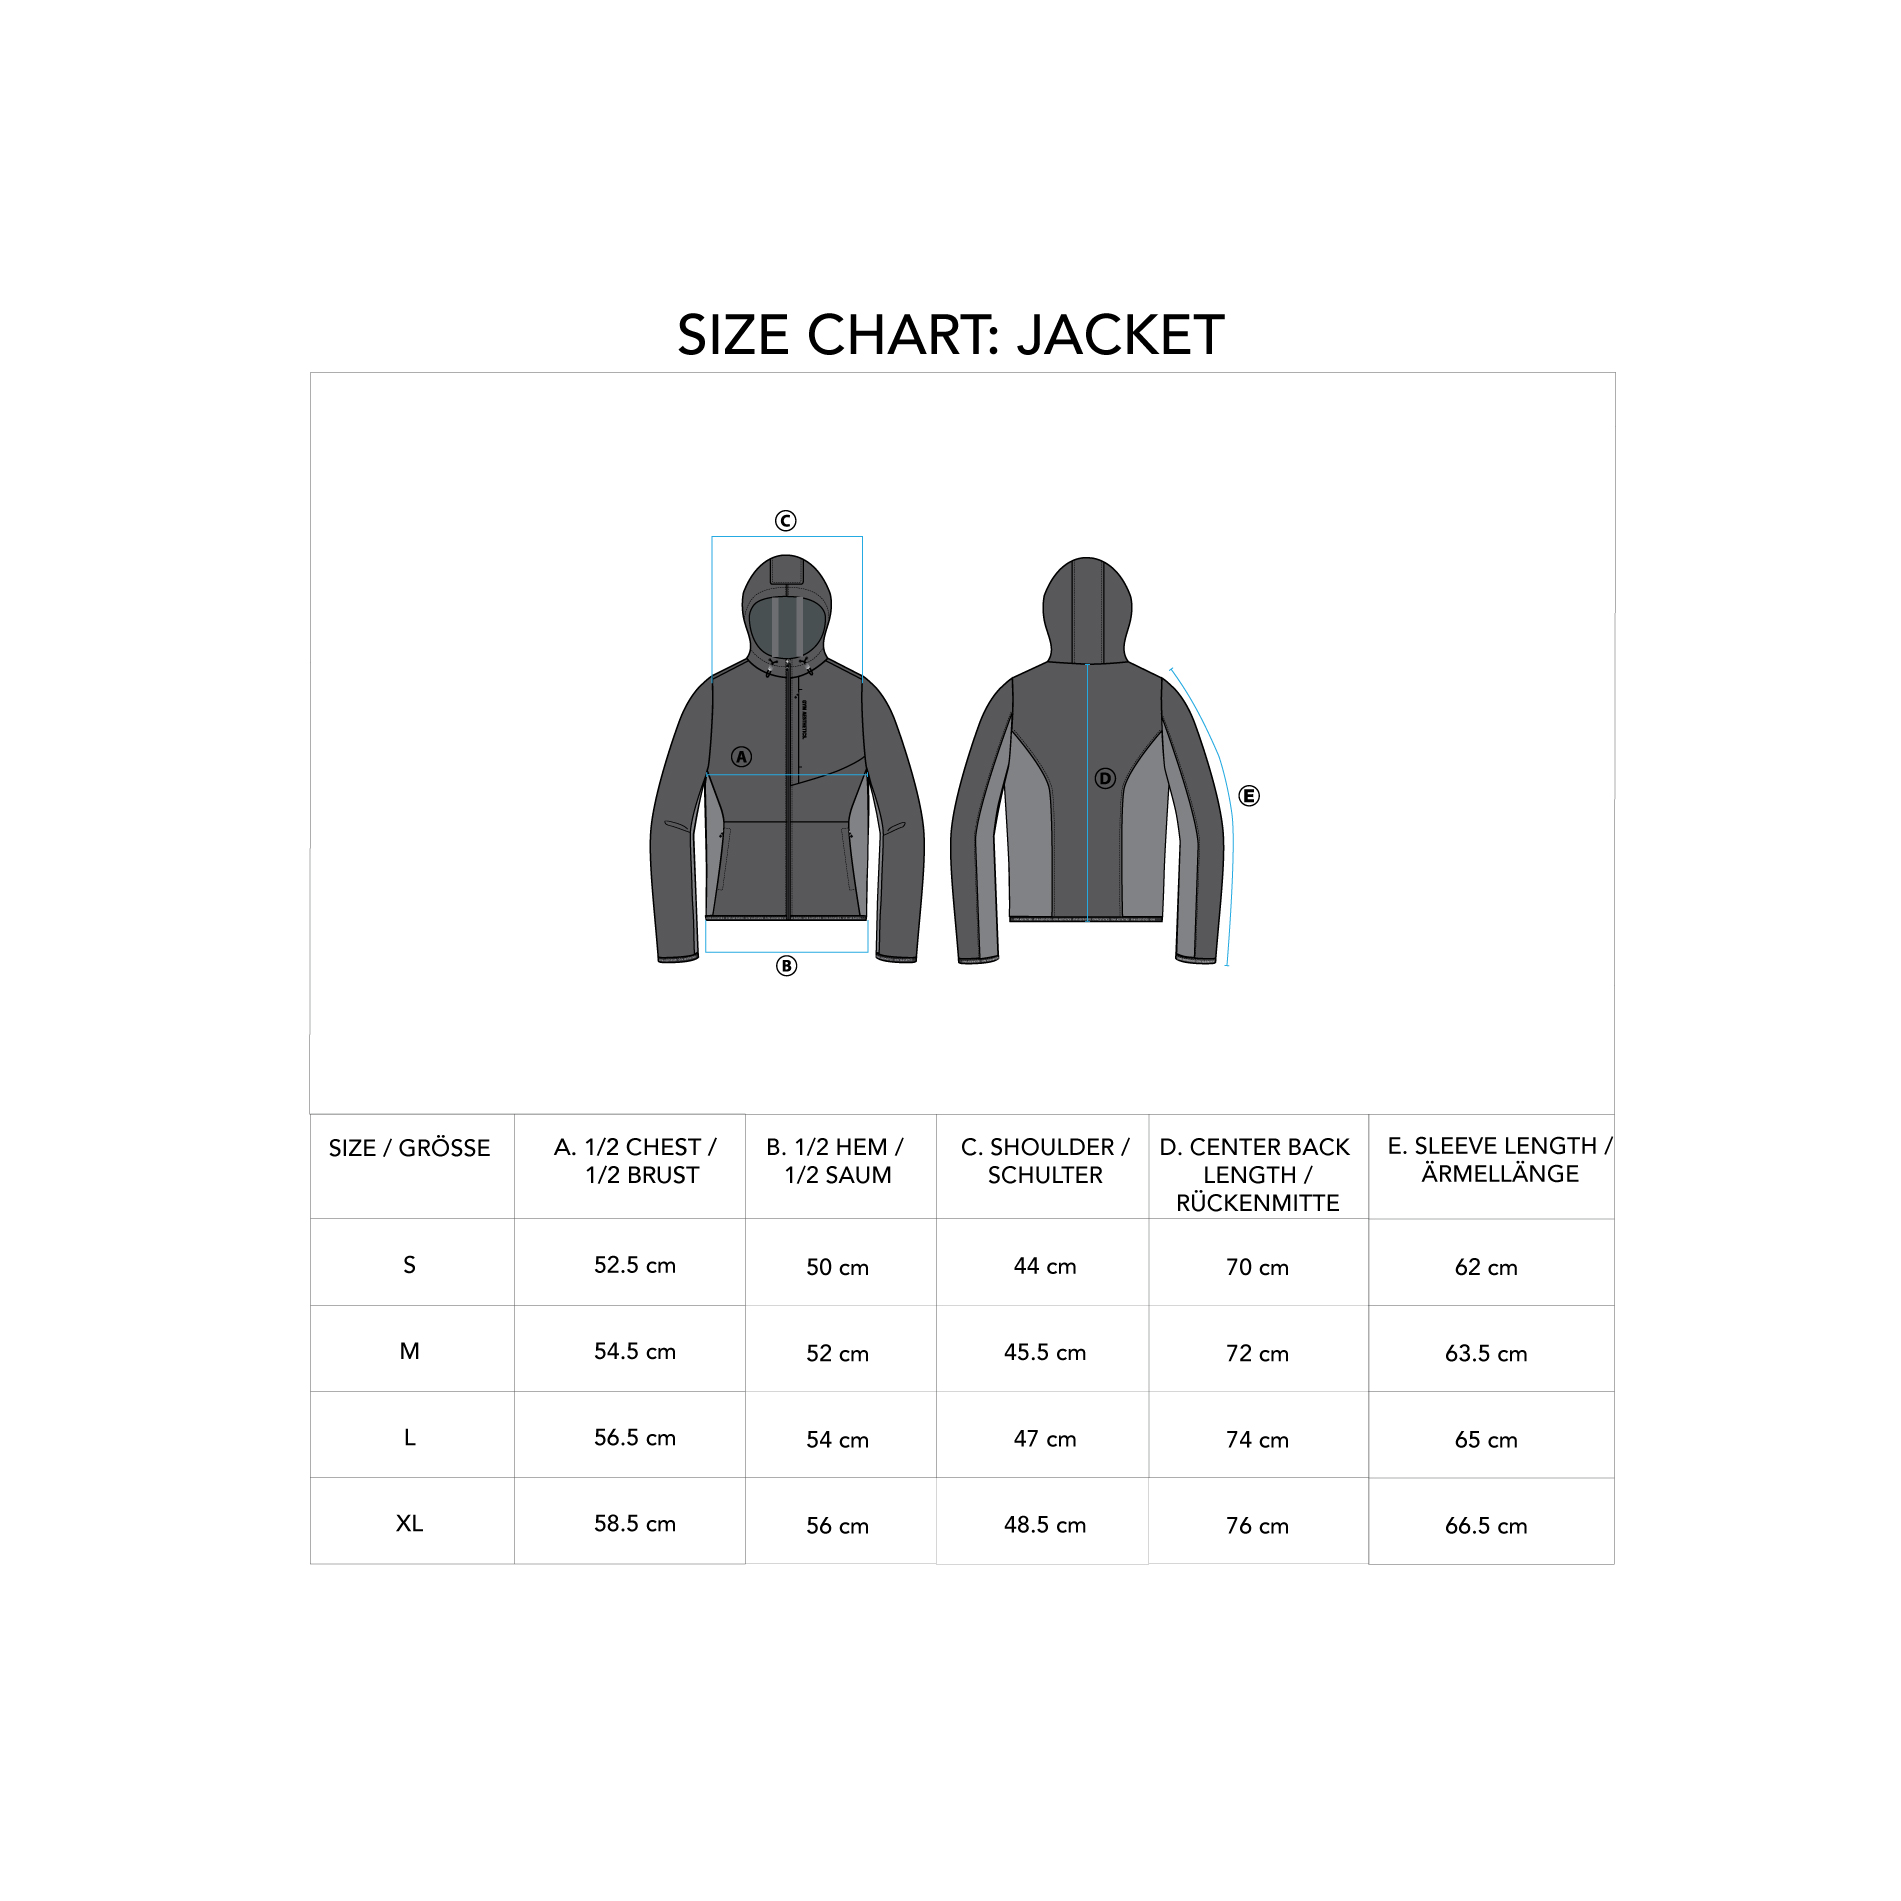 OutRun Multi-Functional Jacket for Men - size chart